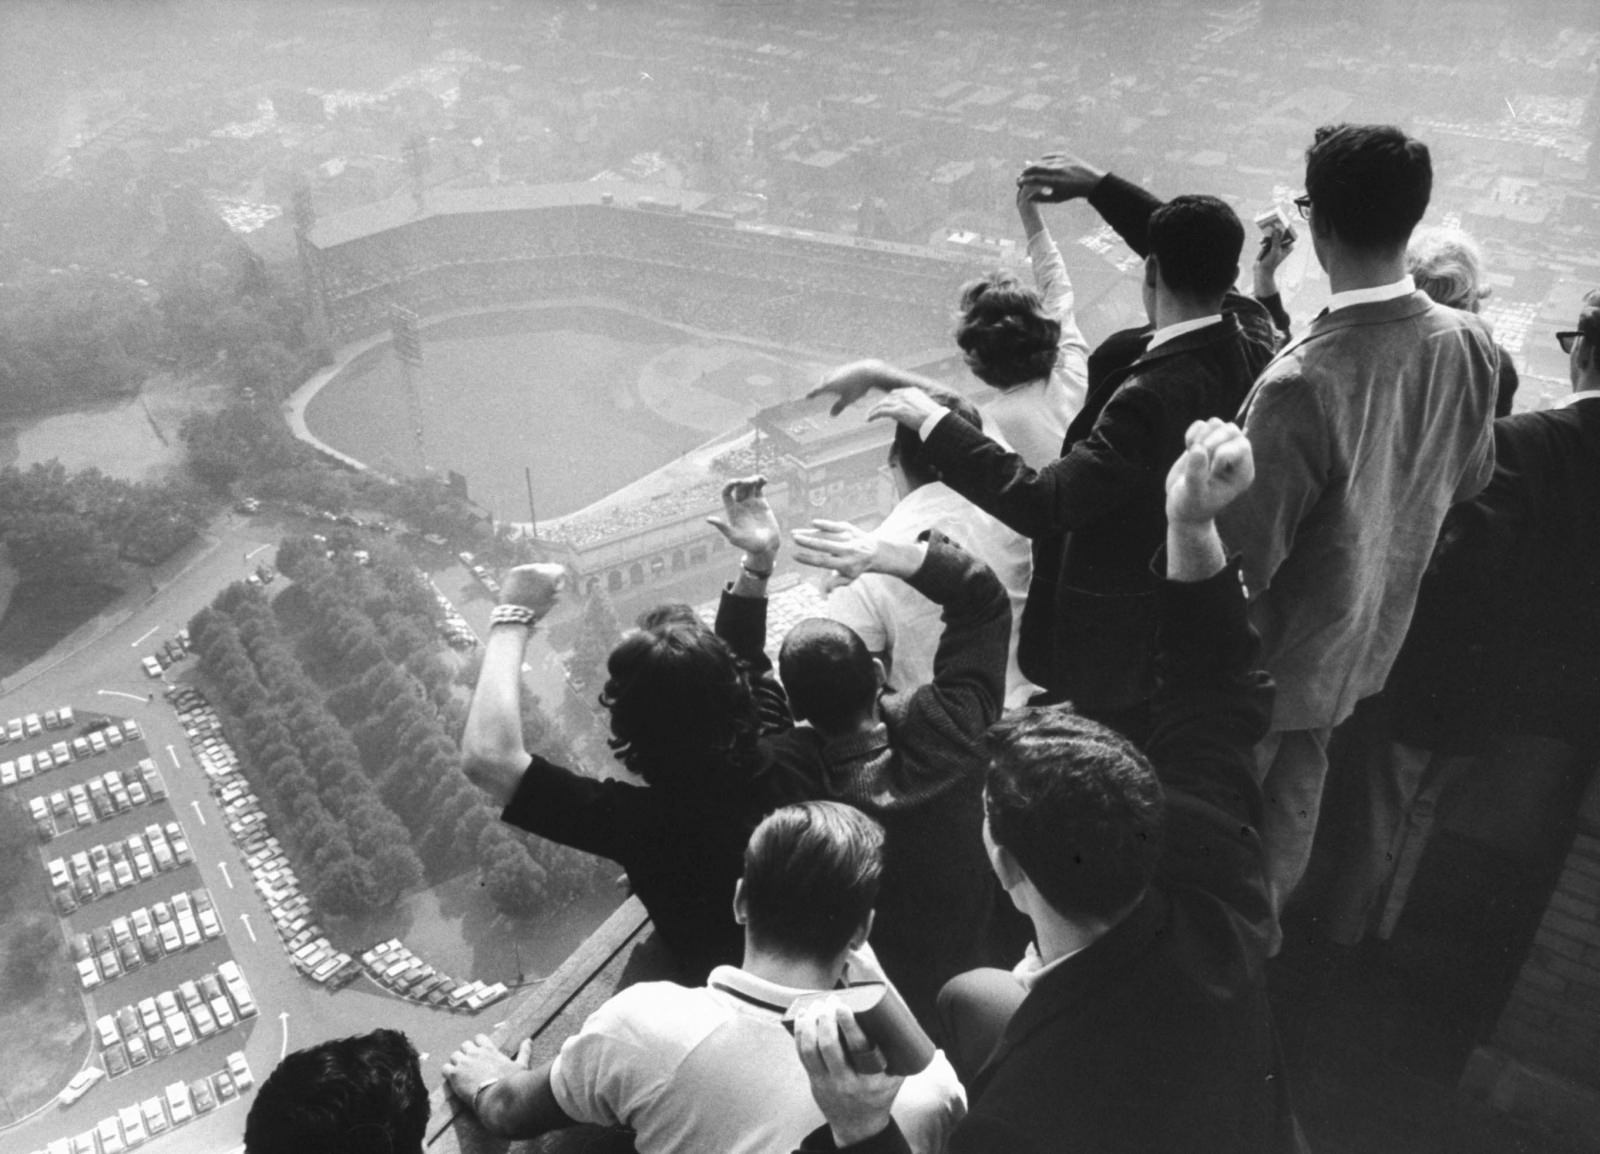 University of Pittsburgh students cheer wildly from atop the Cathedral of Learning, where the Pittsburgh Pirates are playing the Yankees, 1960